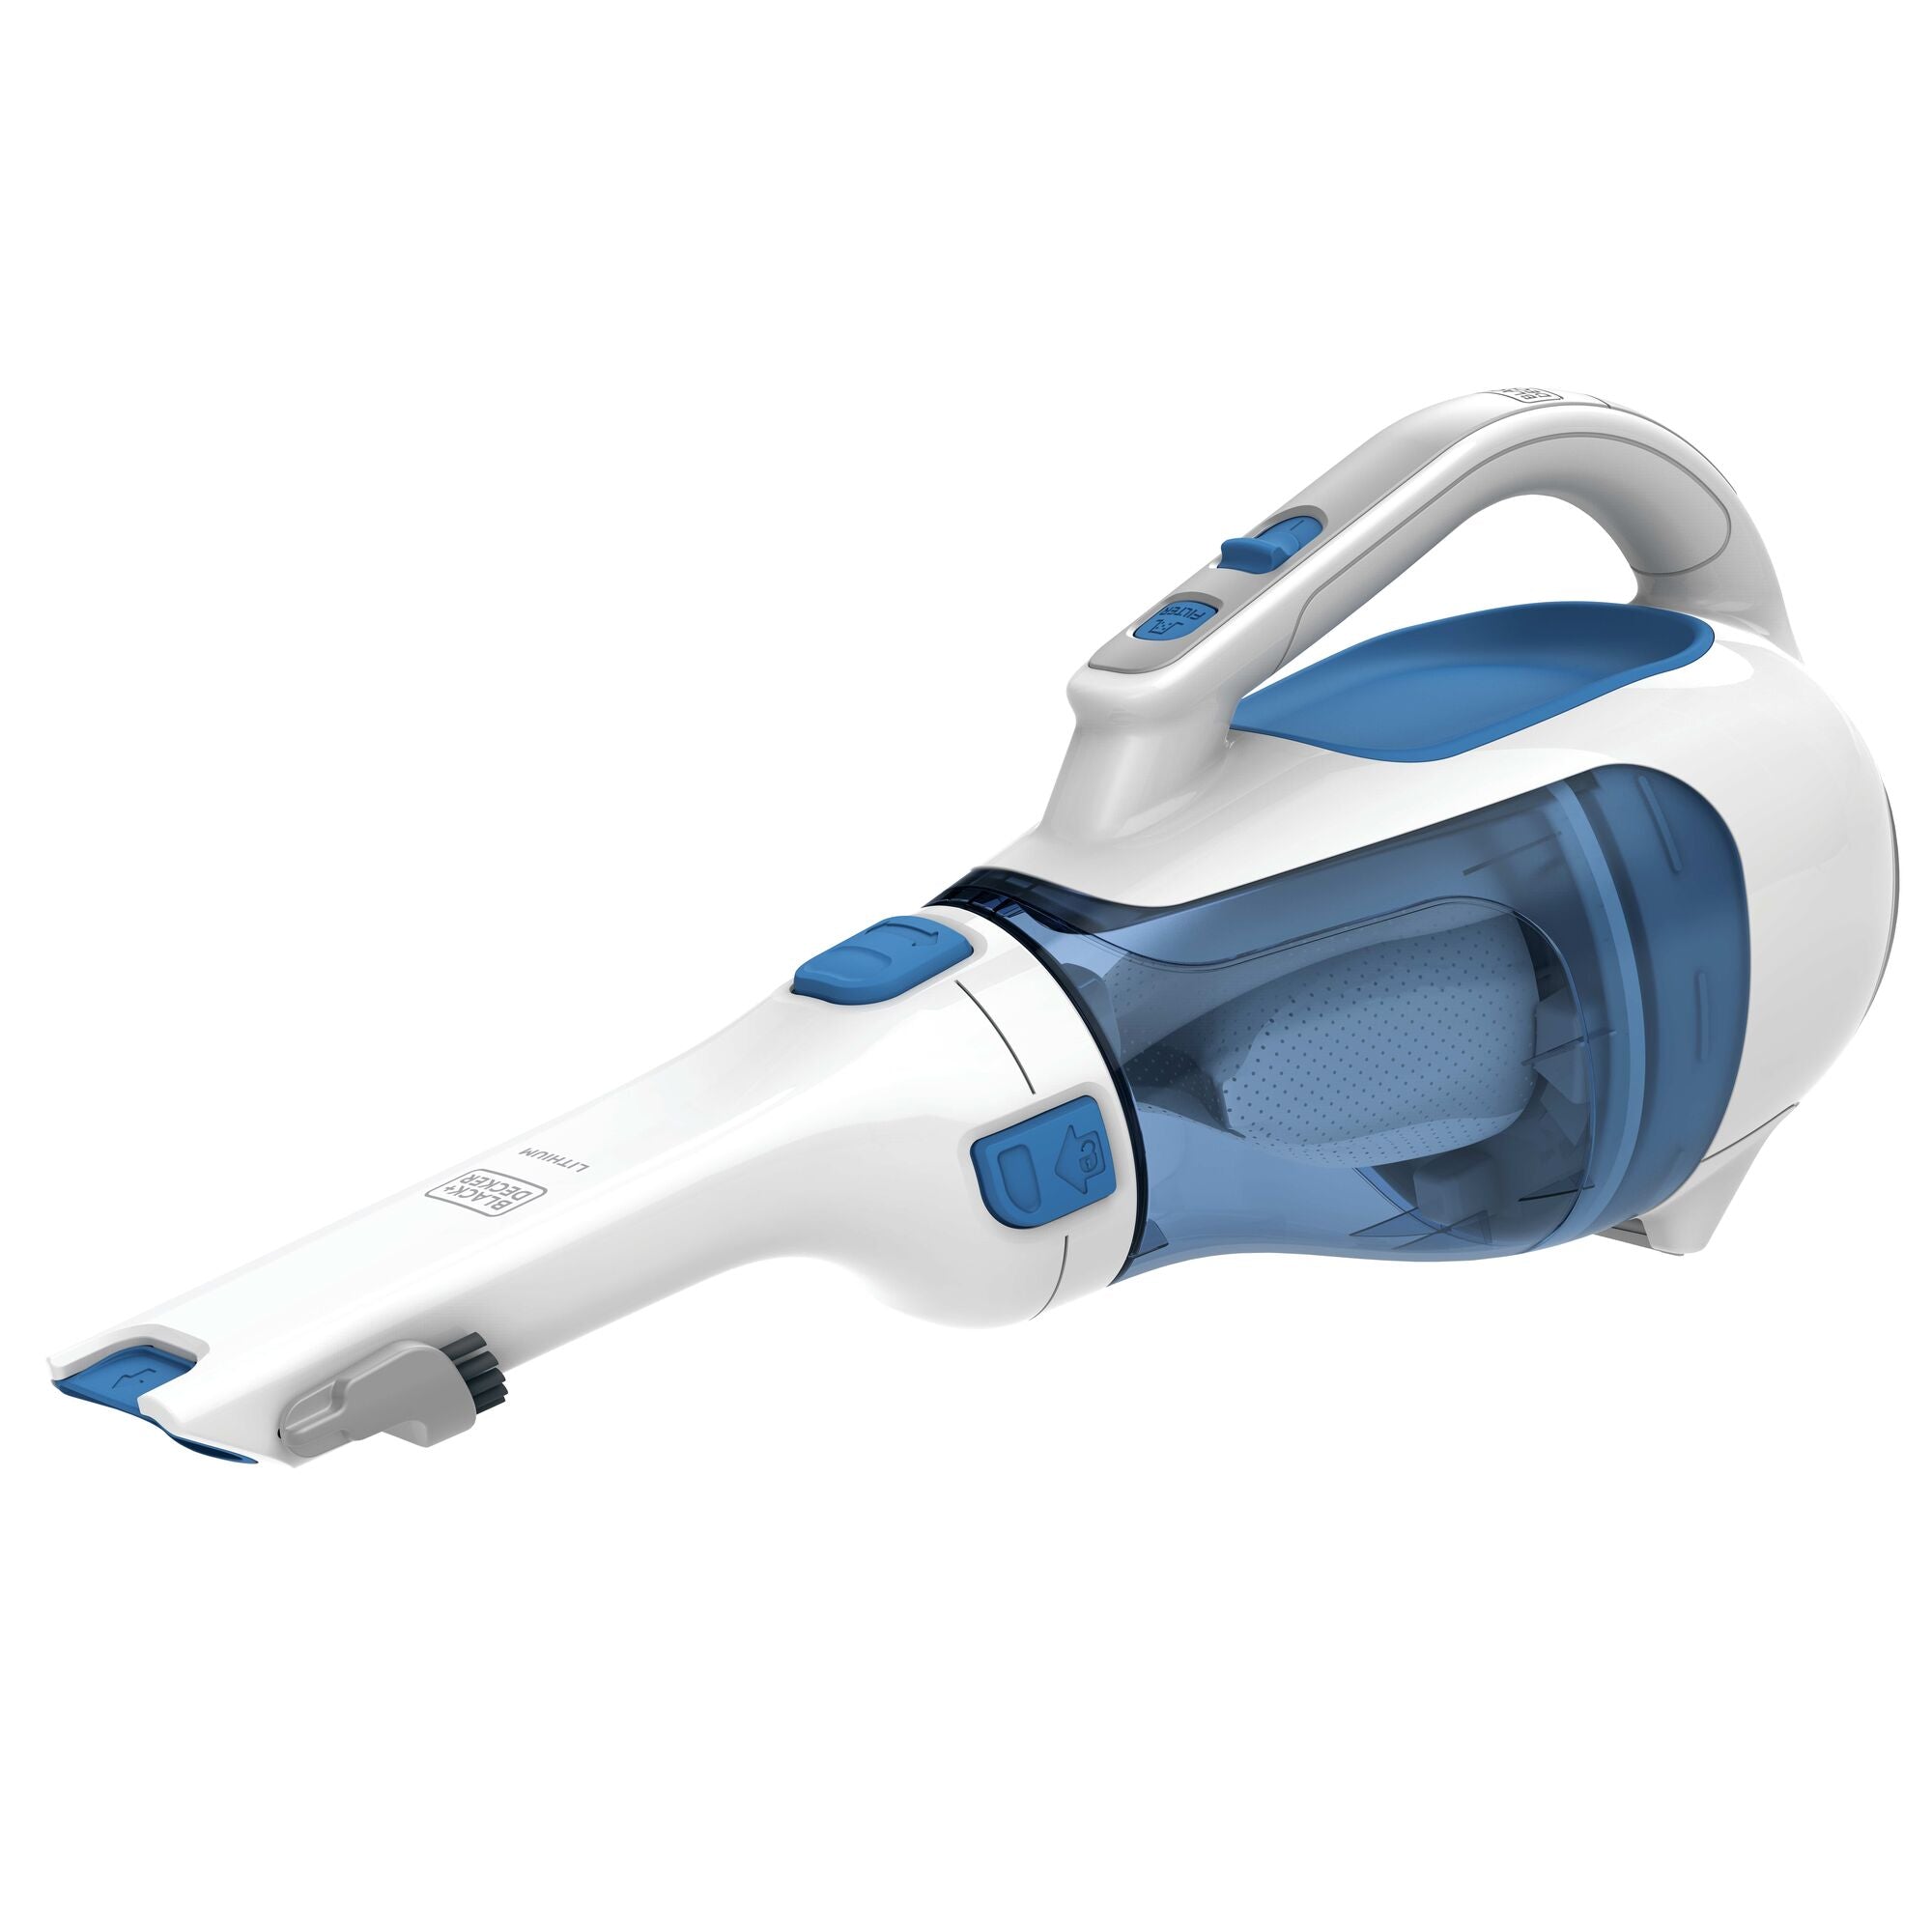 How to Mount the BLACK+DECKER Dustbuster Vacuum on the wall 